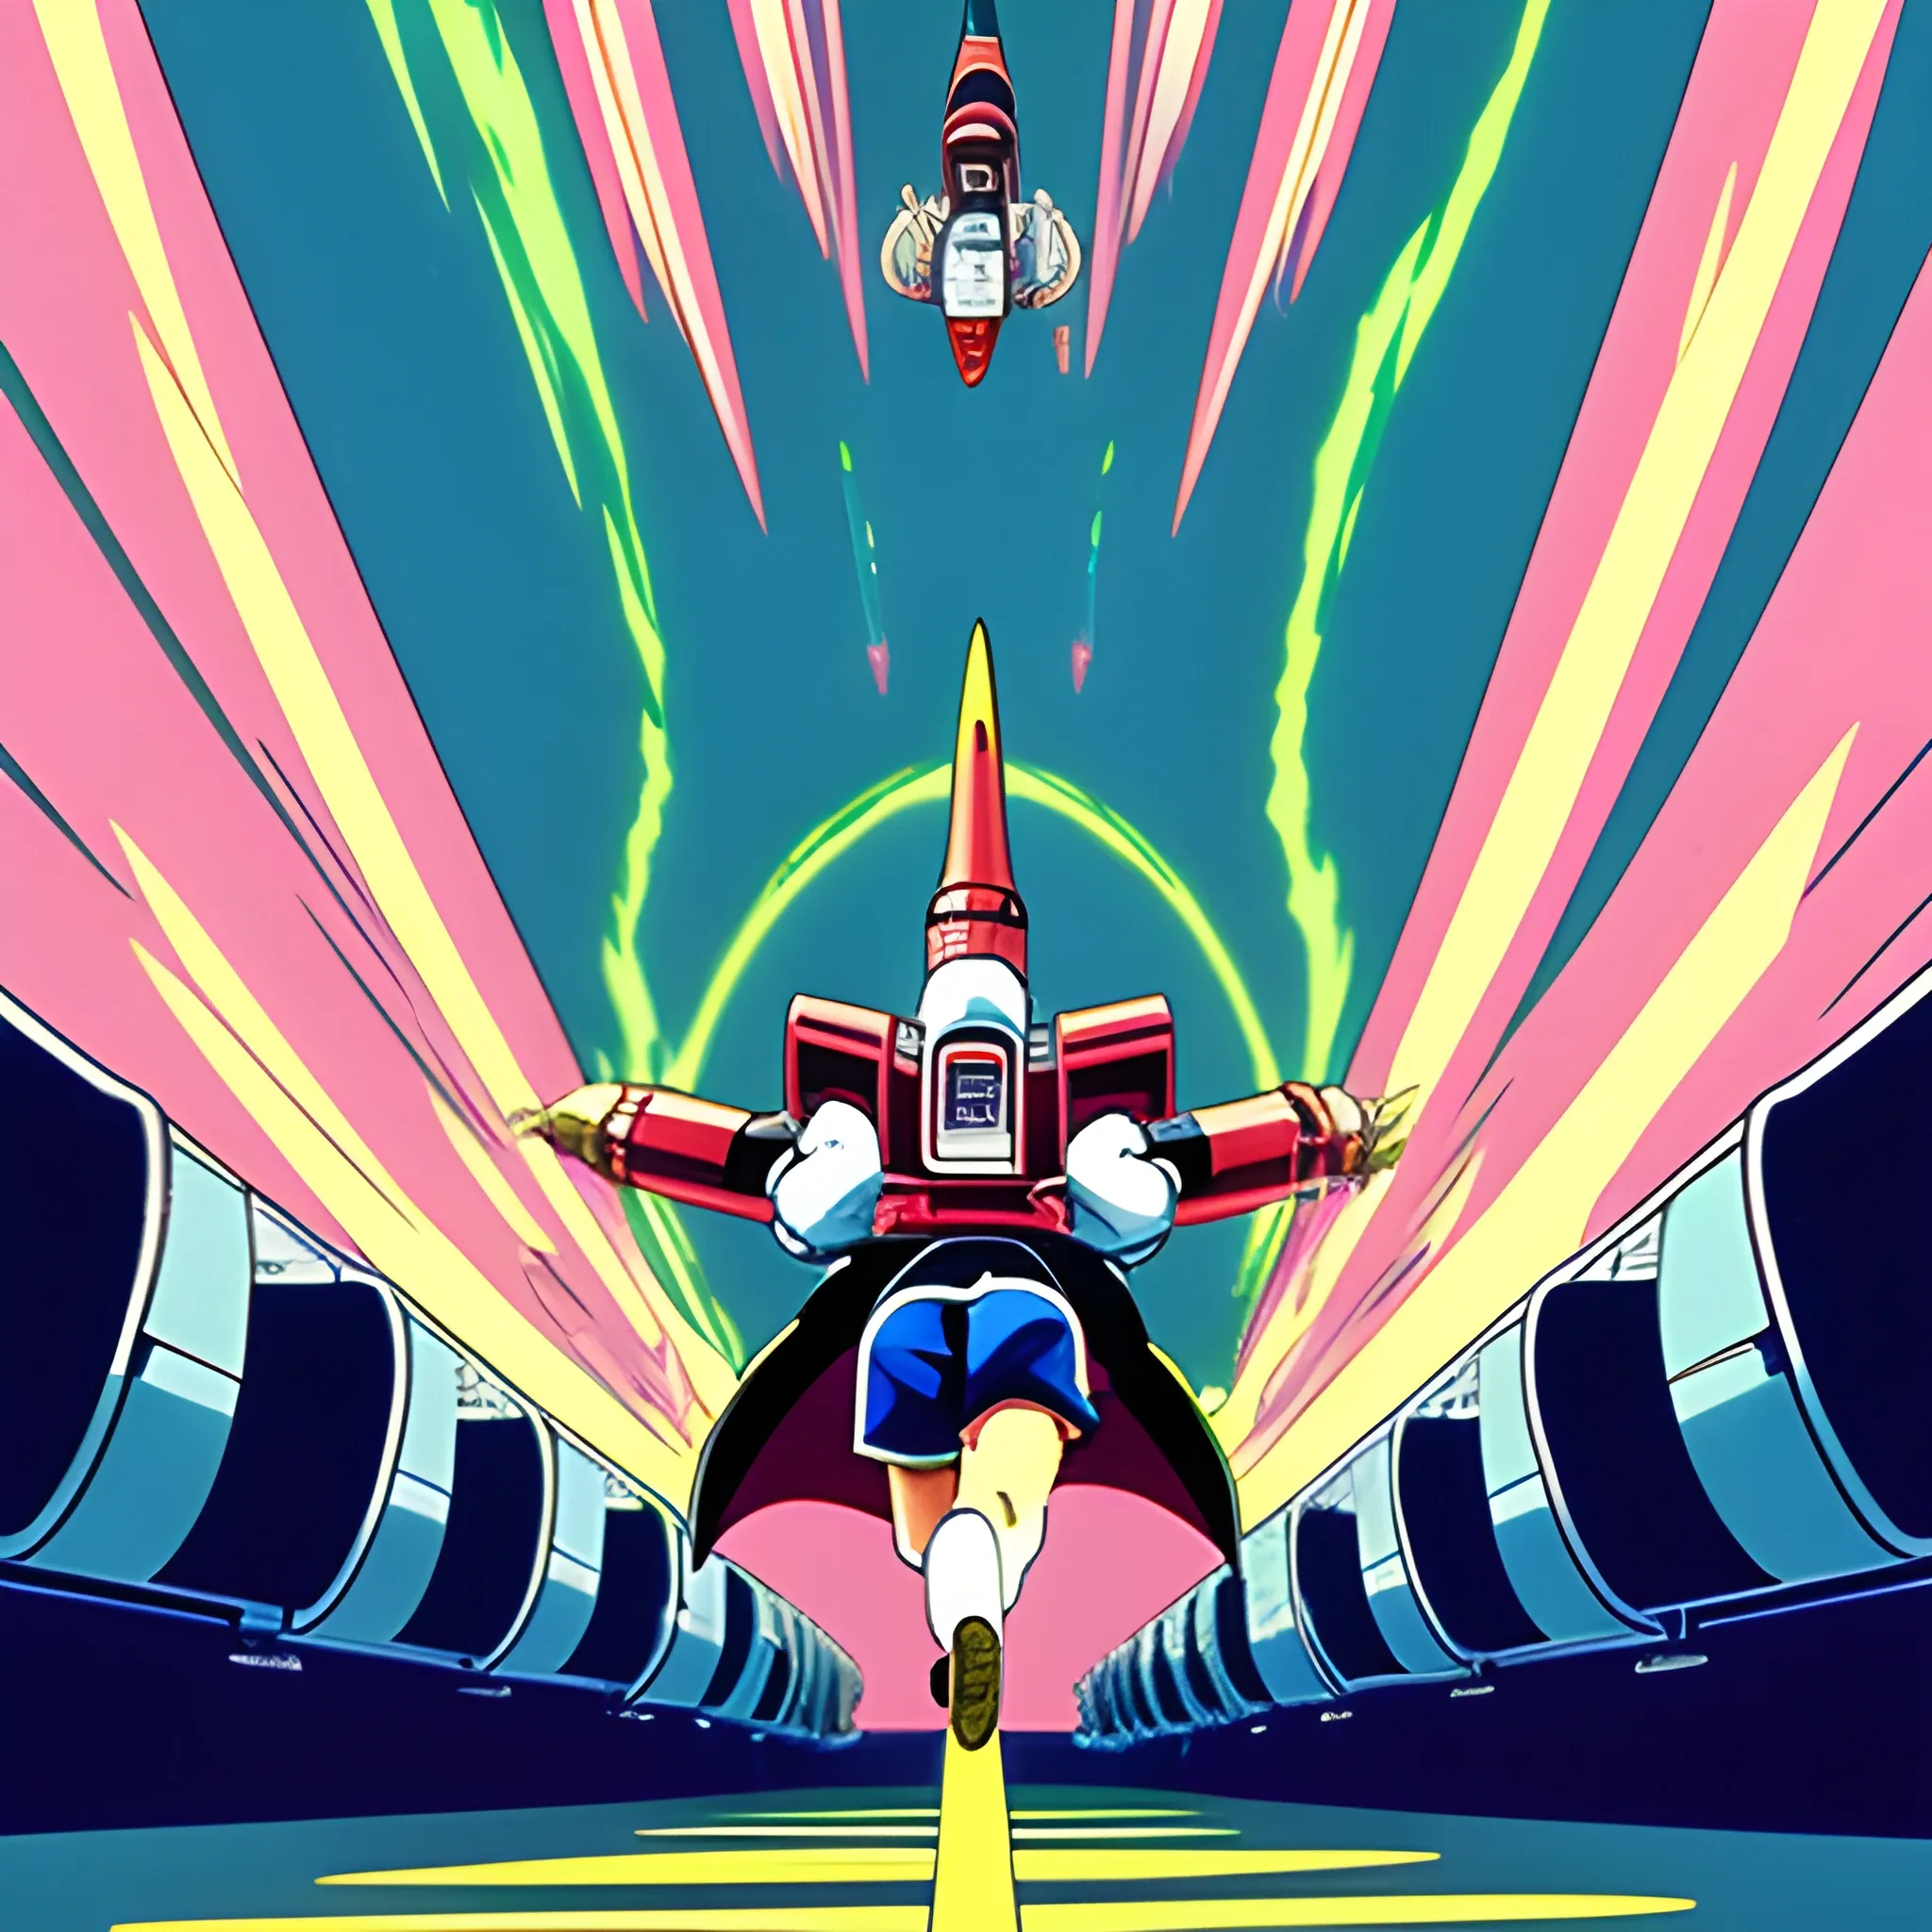 Vintage anime, 90’s anime aesthetic. A stunning maximalist shot the protagonist running towards a rocket ship taking off. Aesthetic. One point perspective.